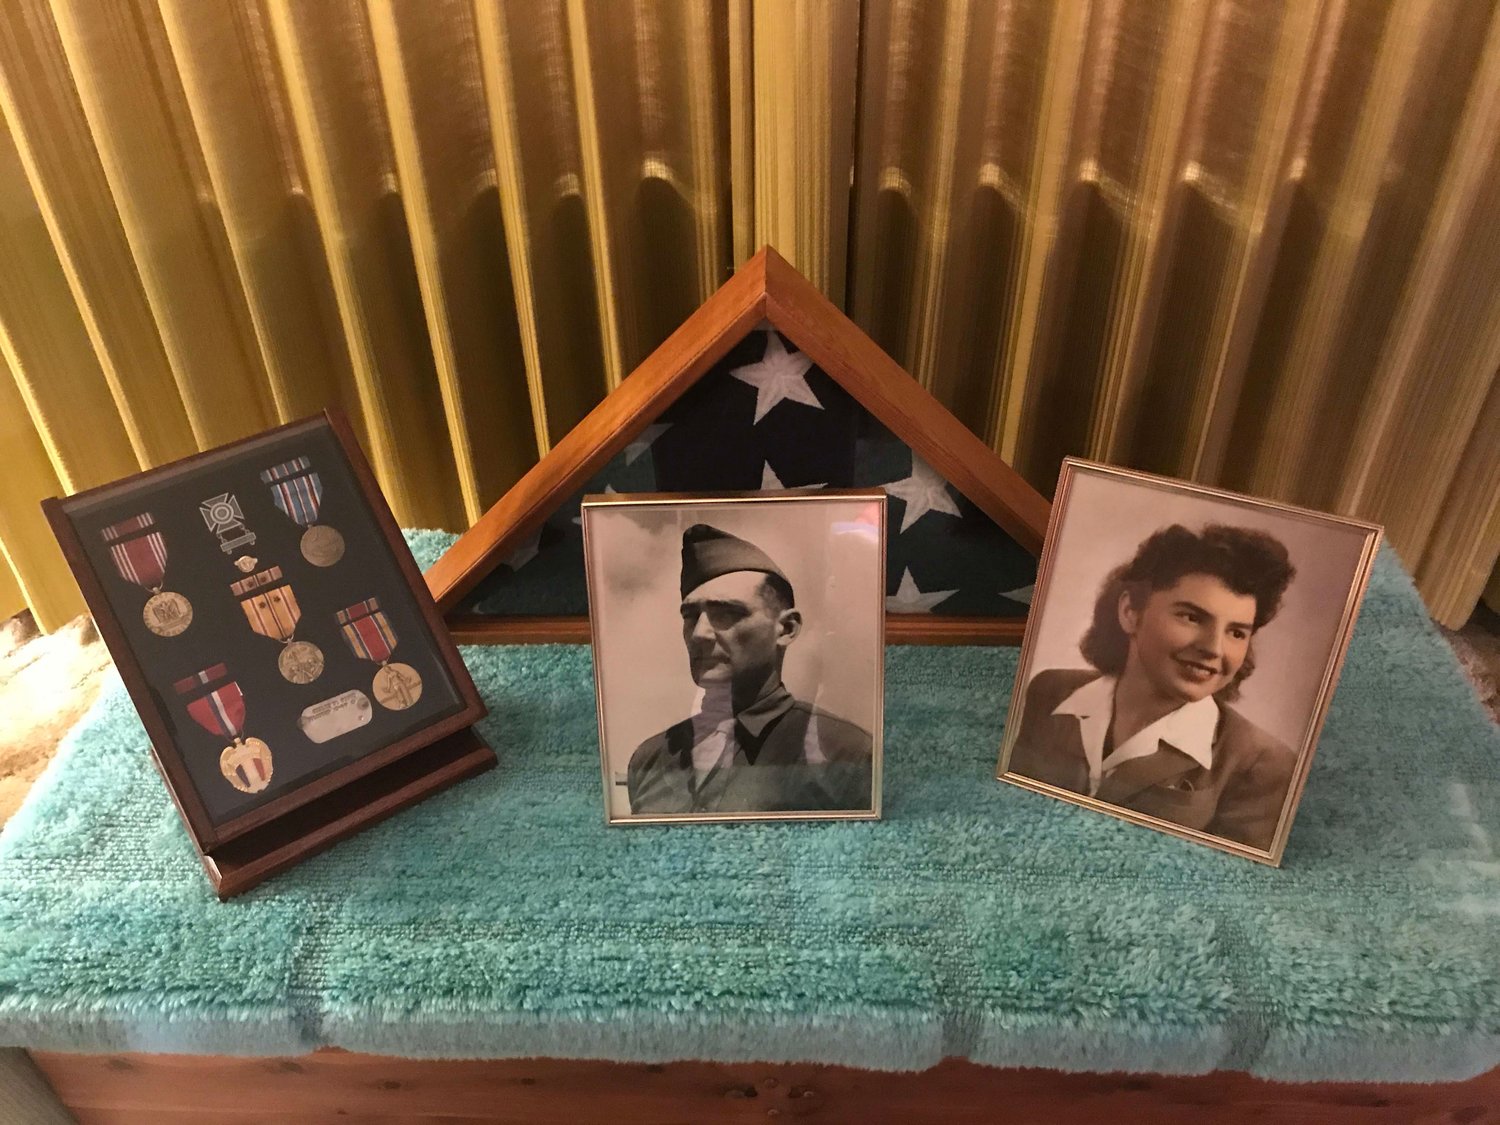 Photos of a young Helen Holloway and her first husband, Merle Foote, with medals from his World War II service, on display in her Centralia home in 2018.